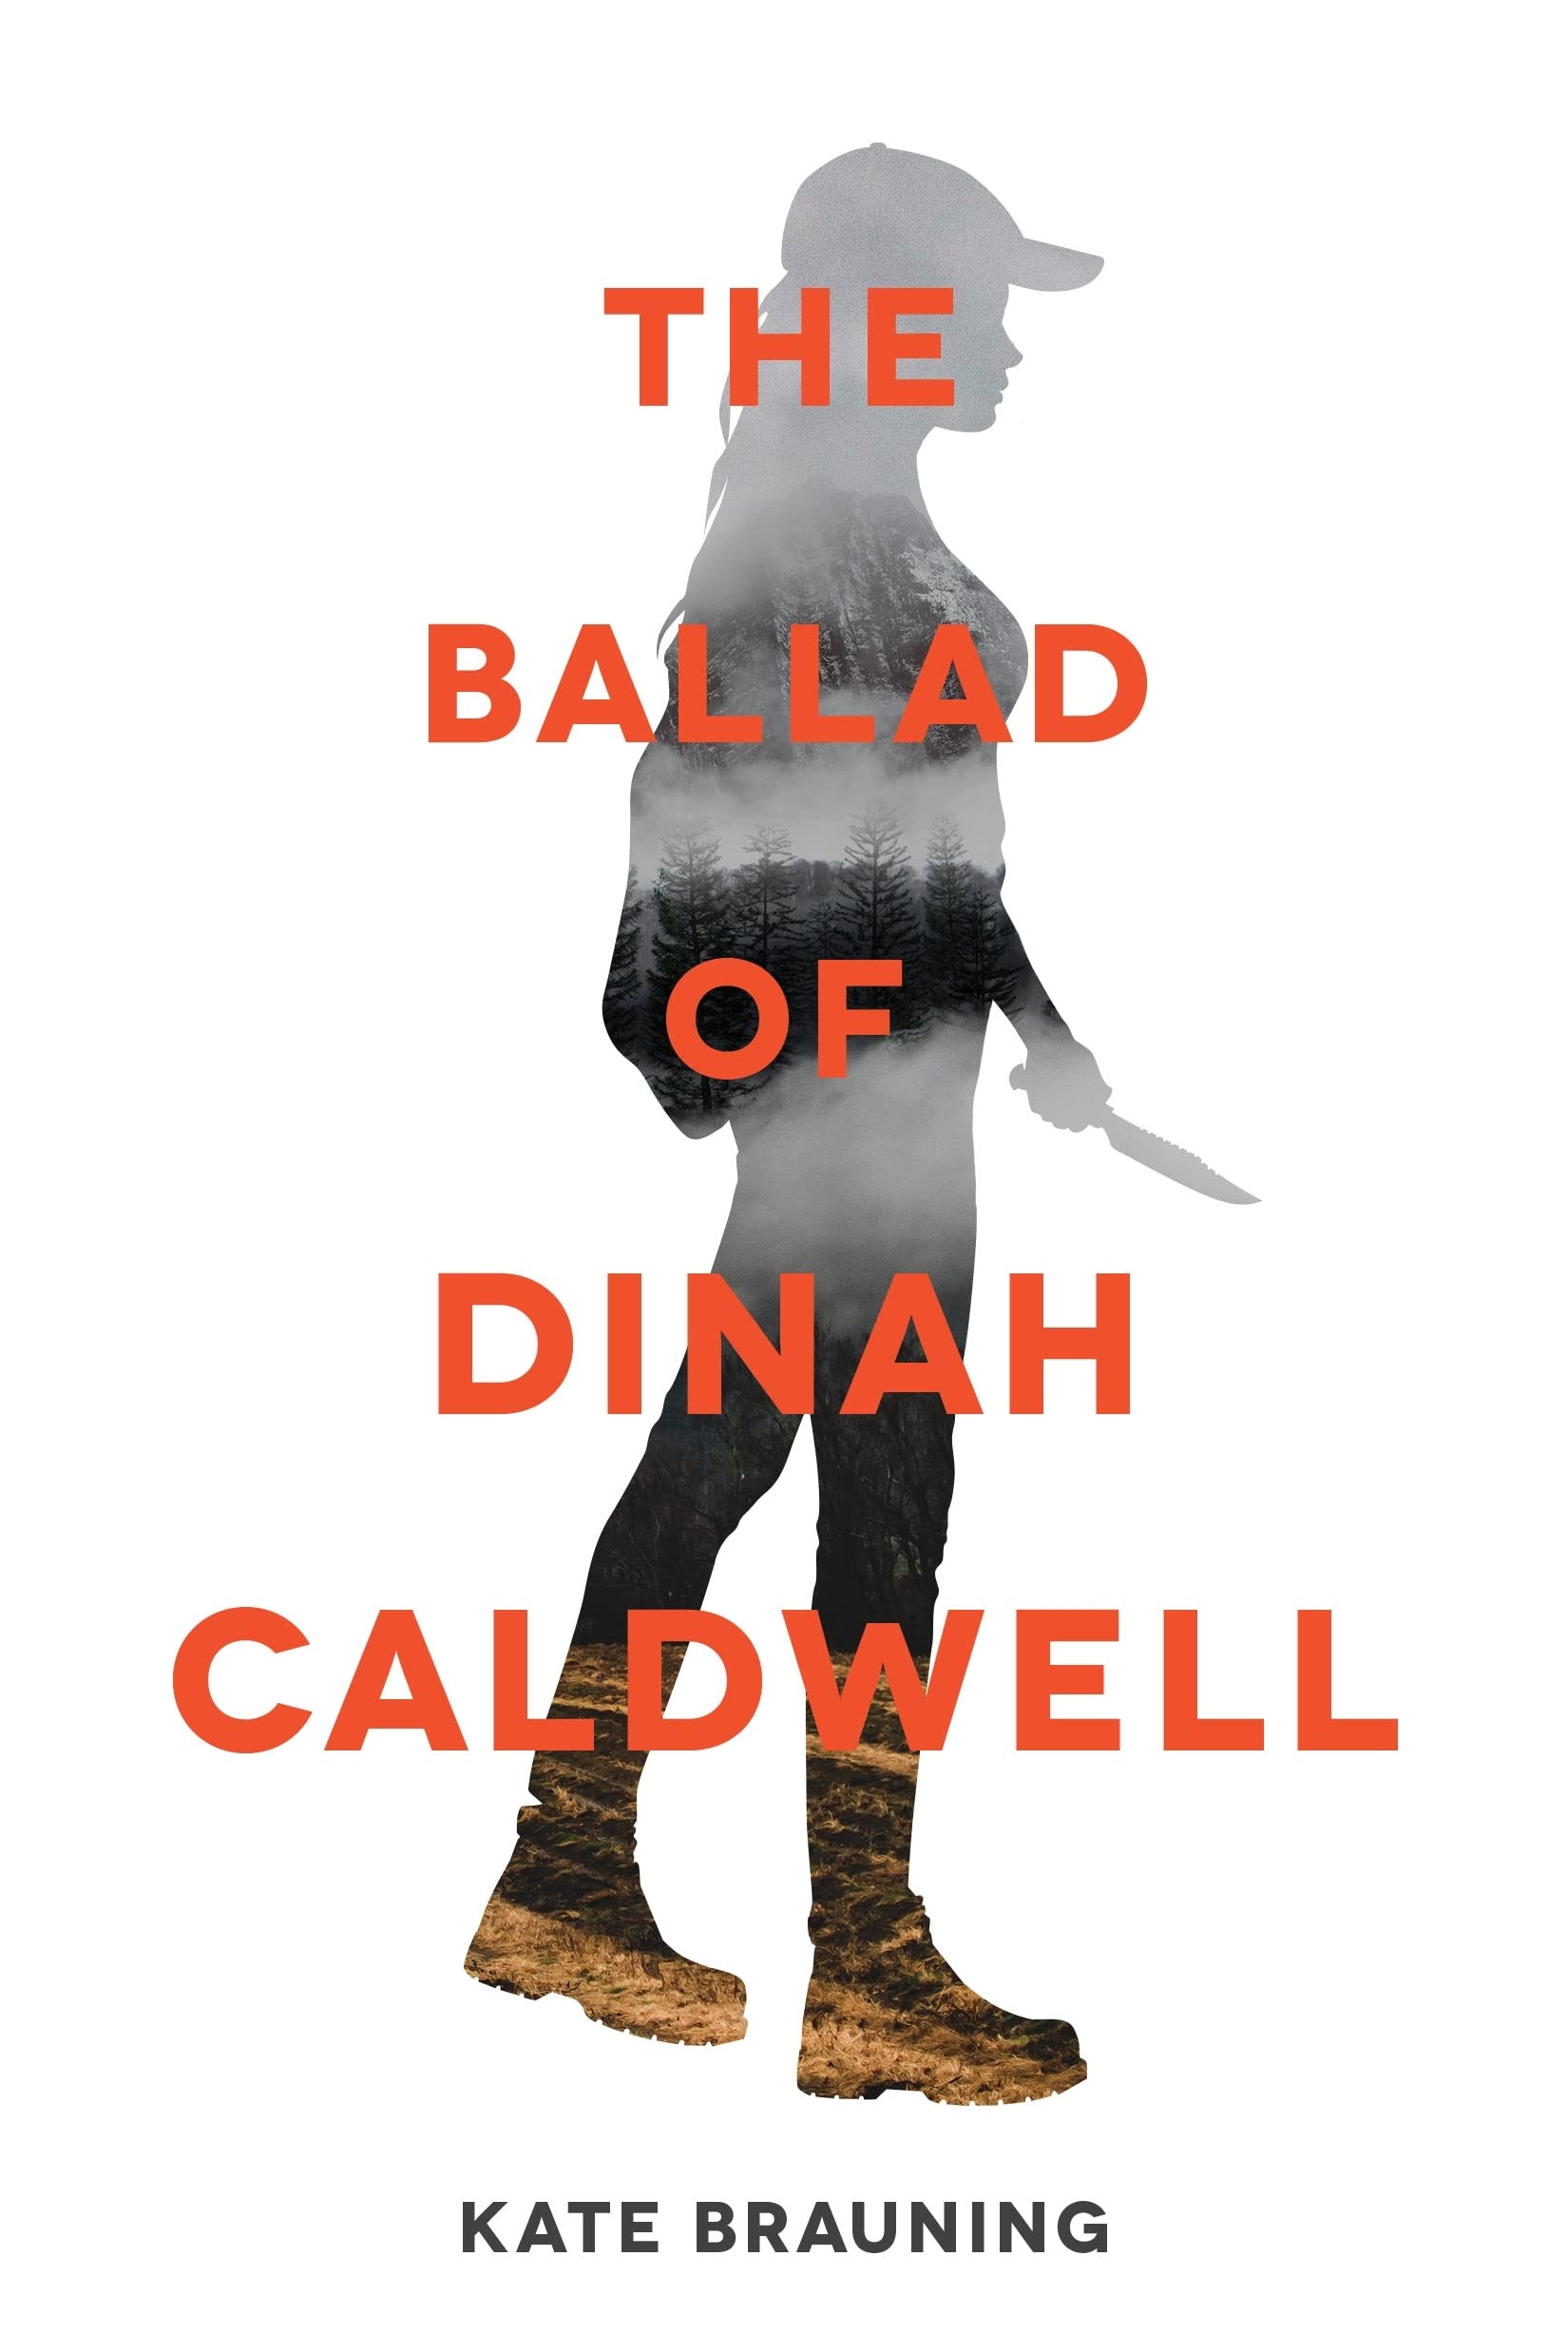 Cover of “The Ballad of Dinah Caldwell” by Kate Brauning